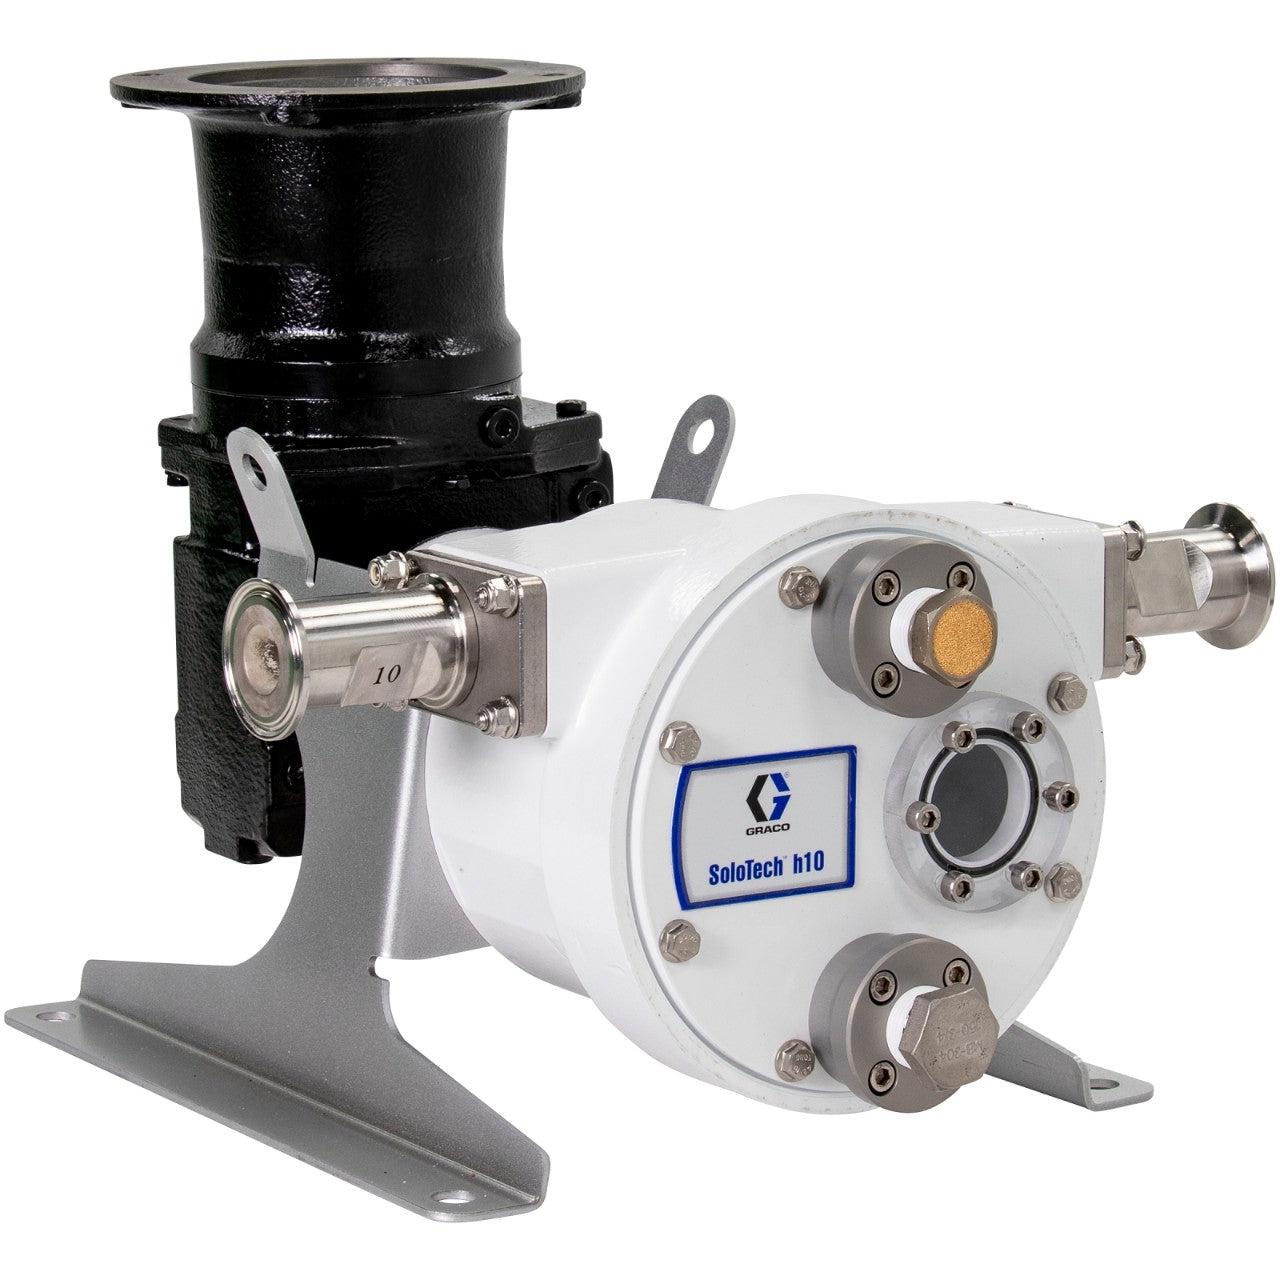 SoloTechª h16 Peristaltic Pump, Low-speed gear reducer no motor, IEC, FDA Nitrile Hose, SST Sanitary Clamp Barb